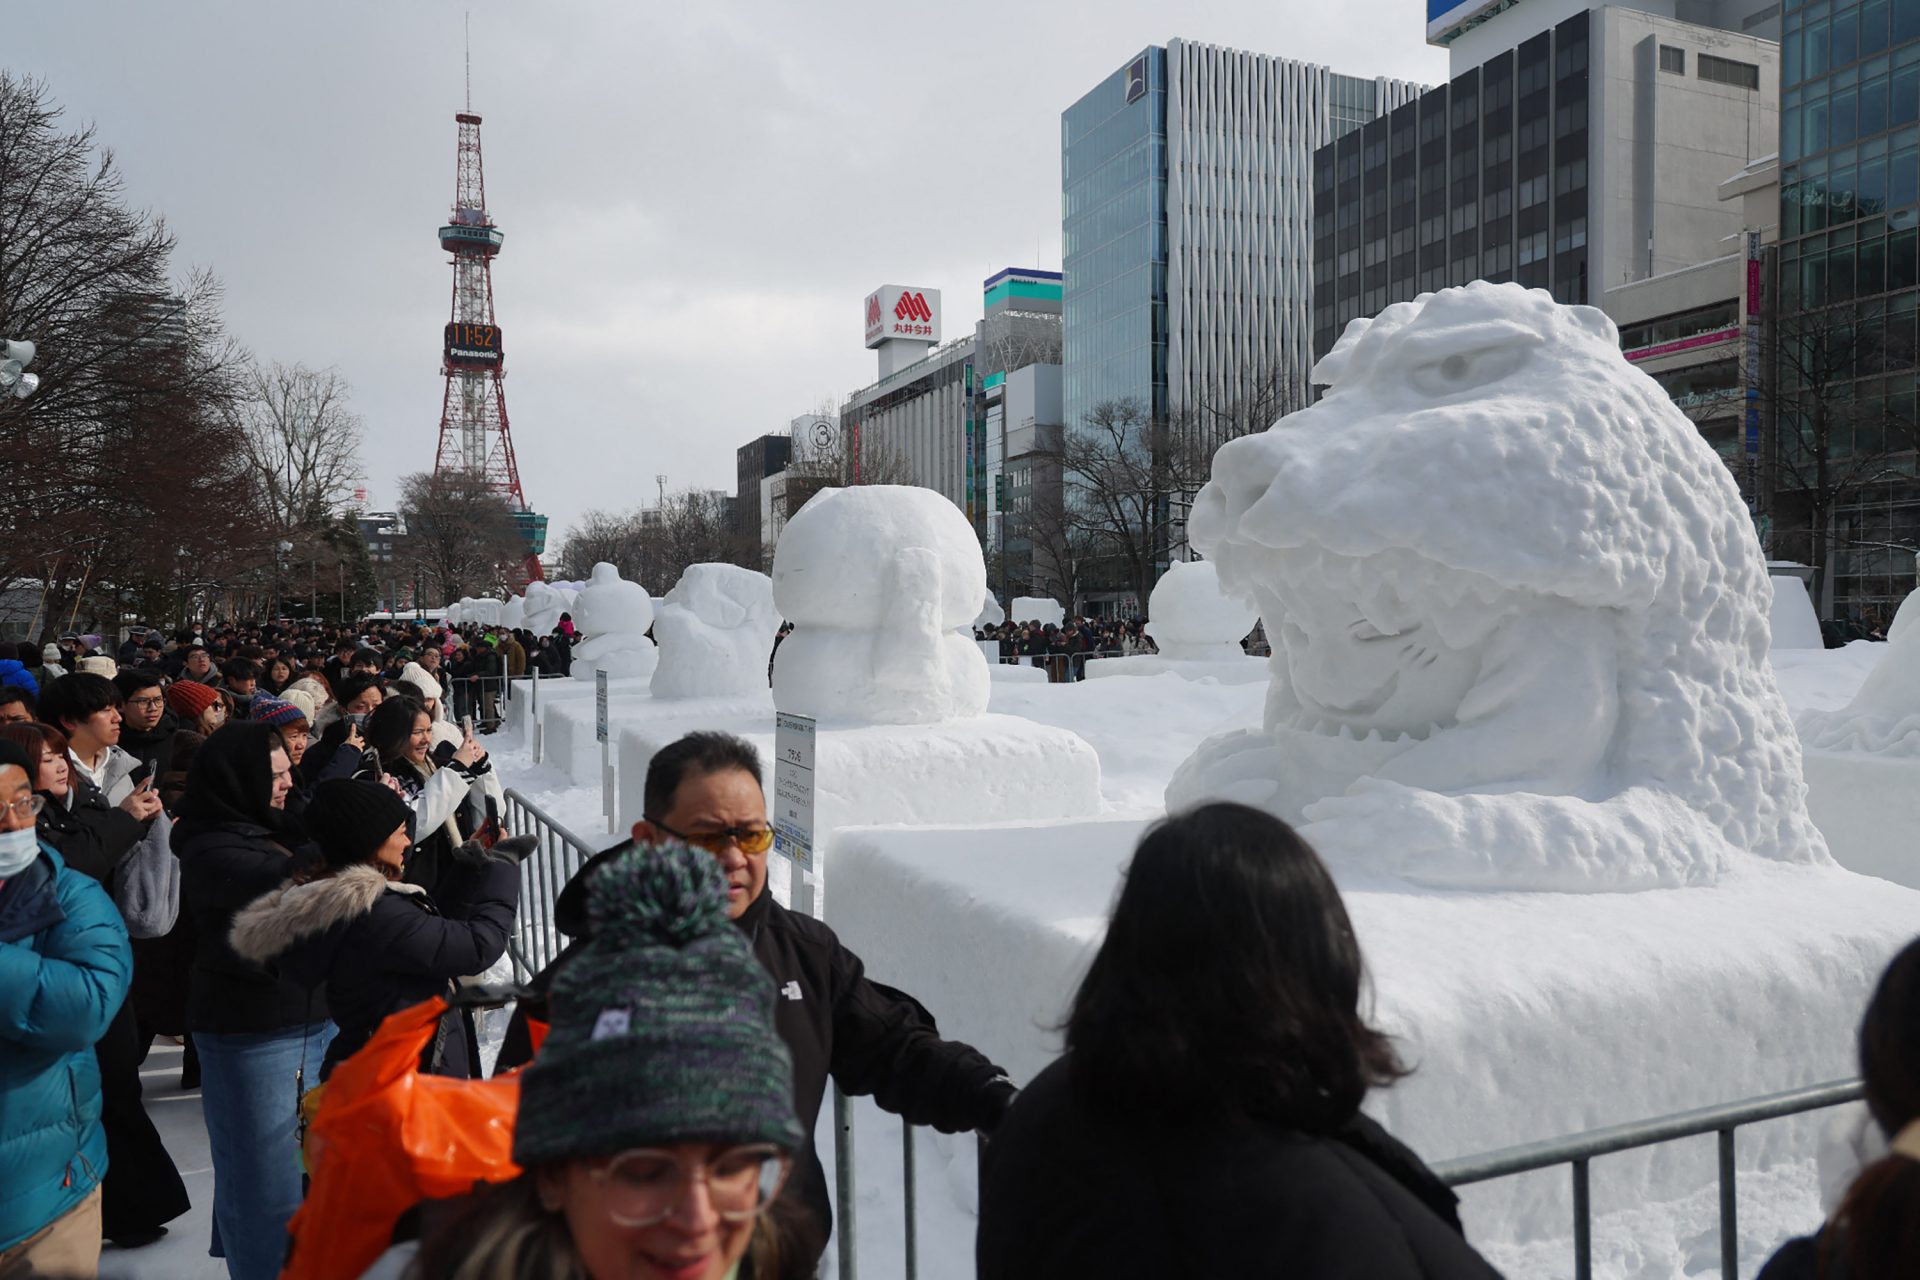 The snow sculptures lined up neatly at Odori park